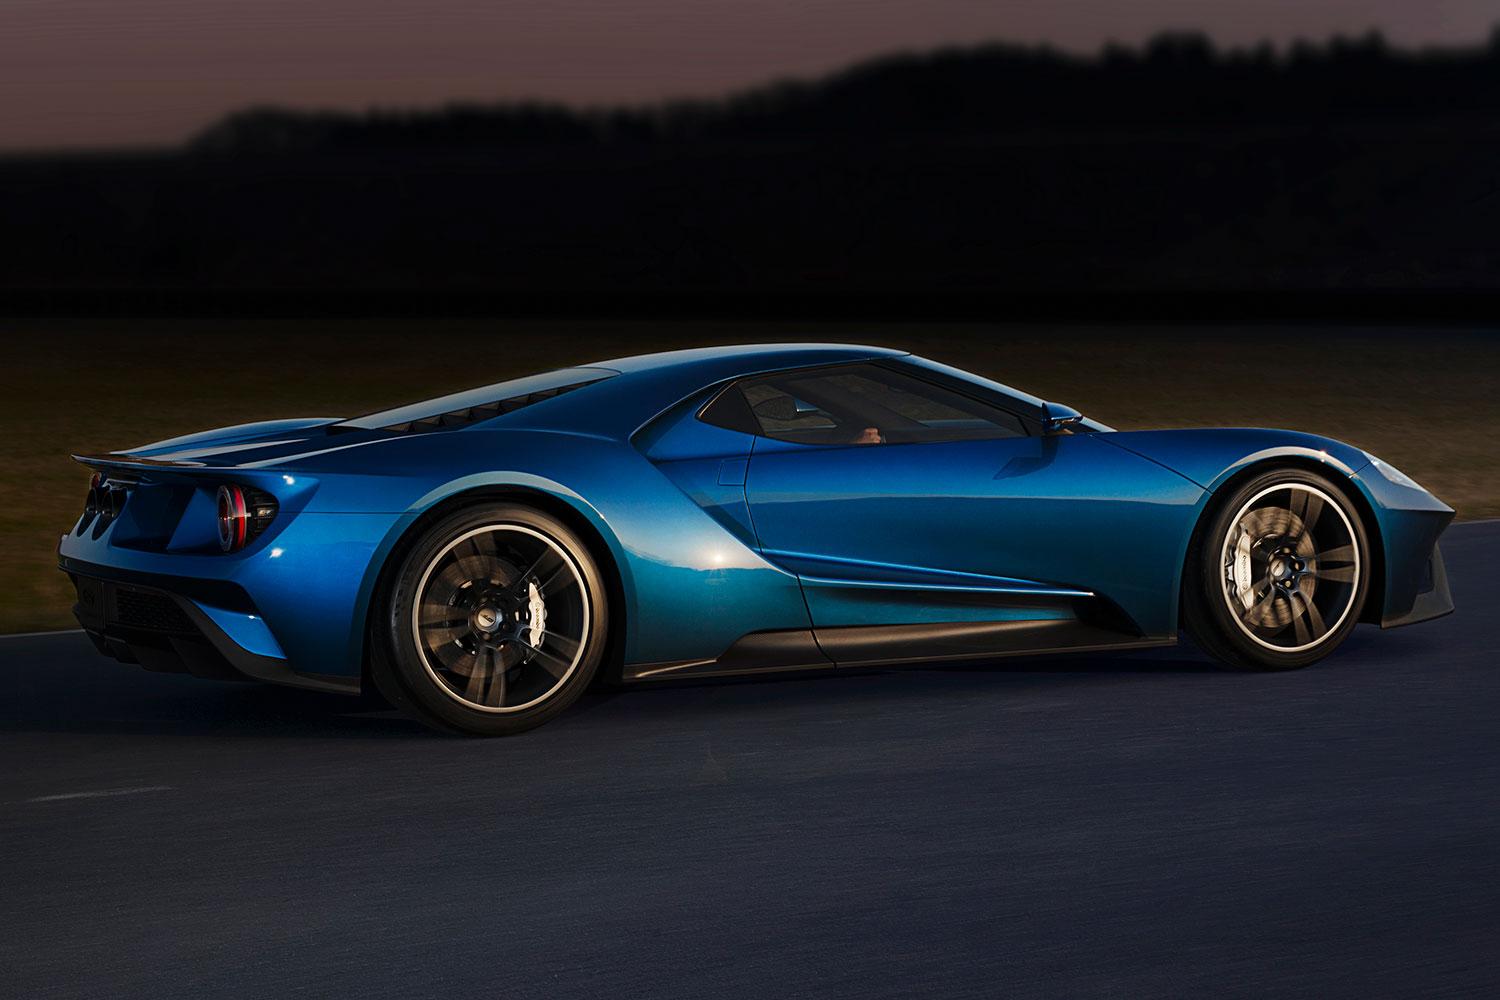 meet the man who sculpted softer side of fords hardcore 2016 gt all newfordgt 09